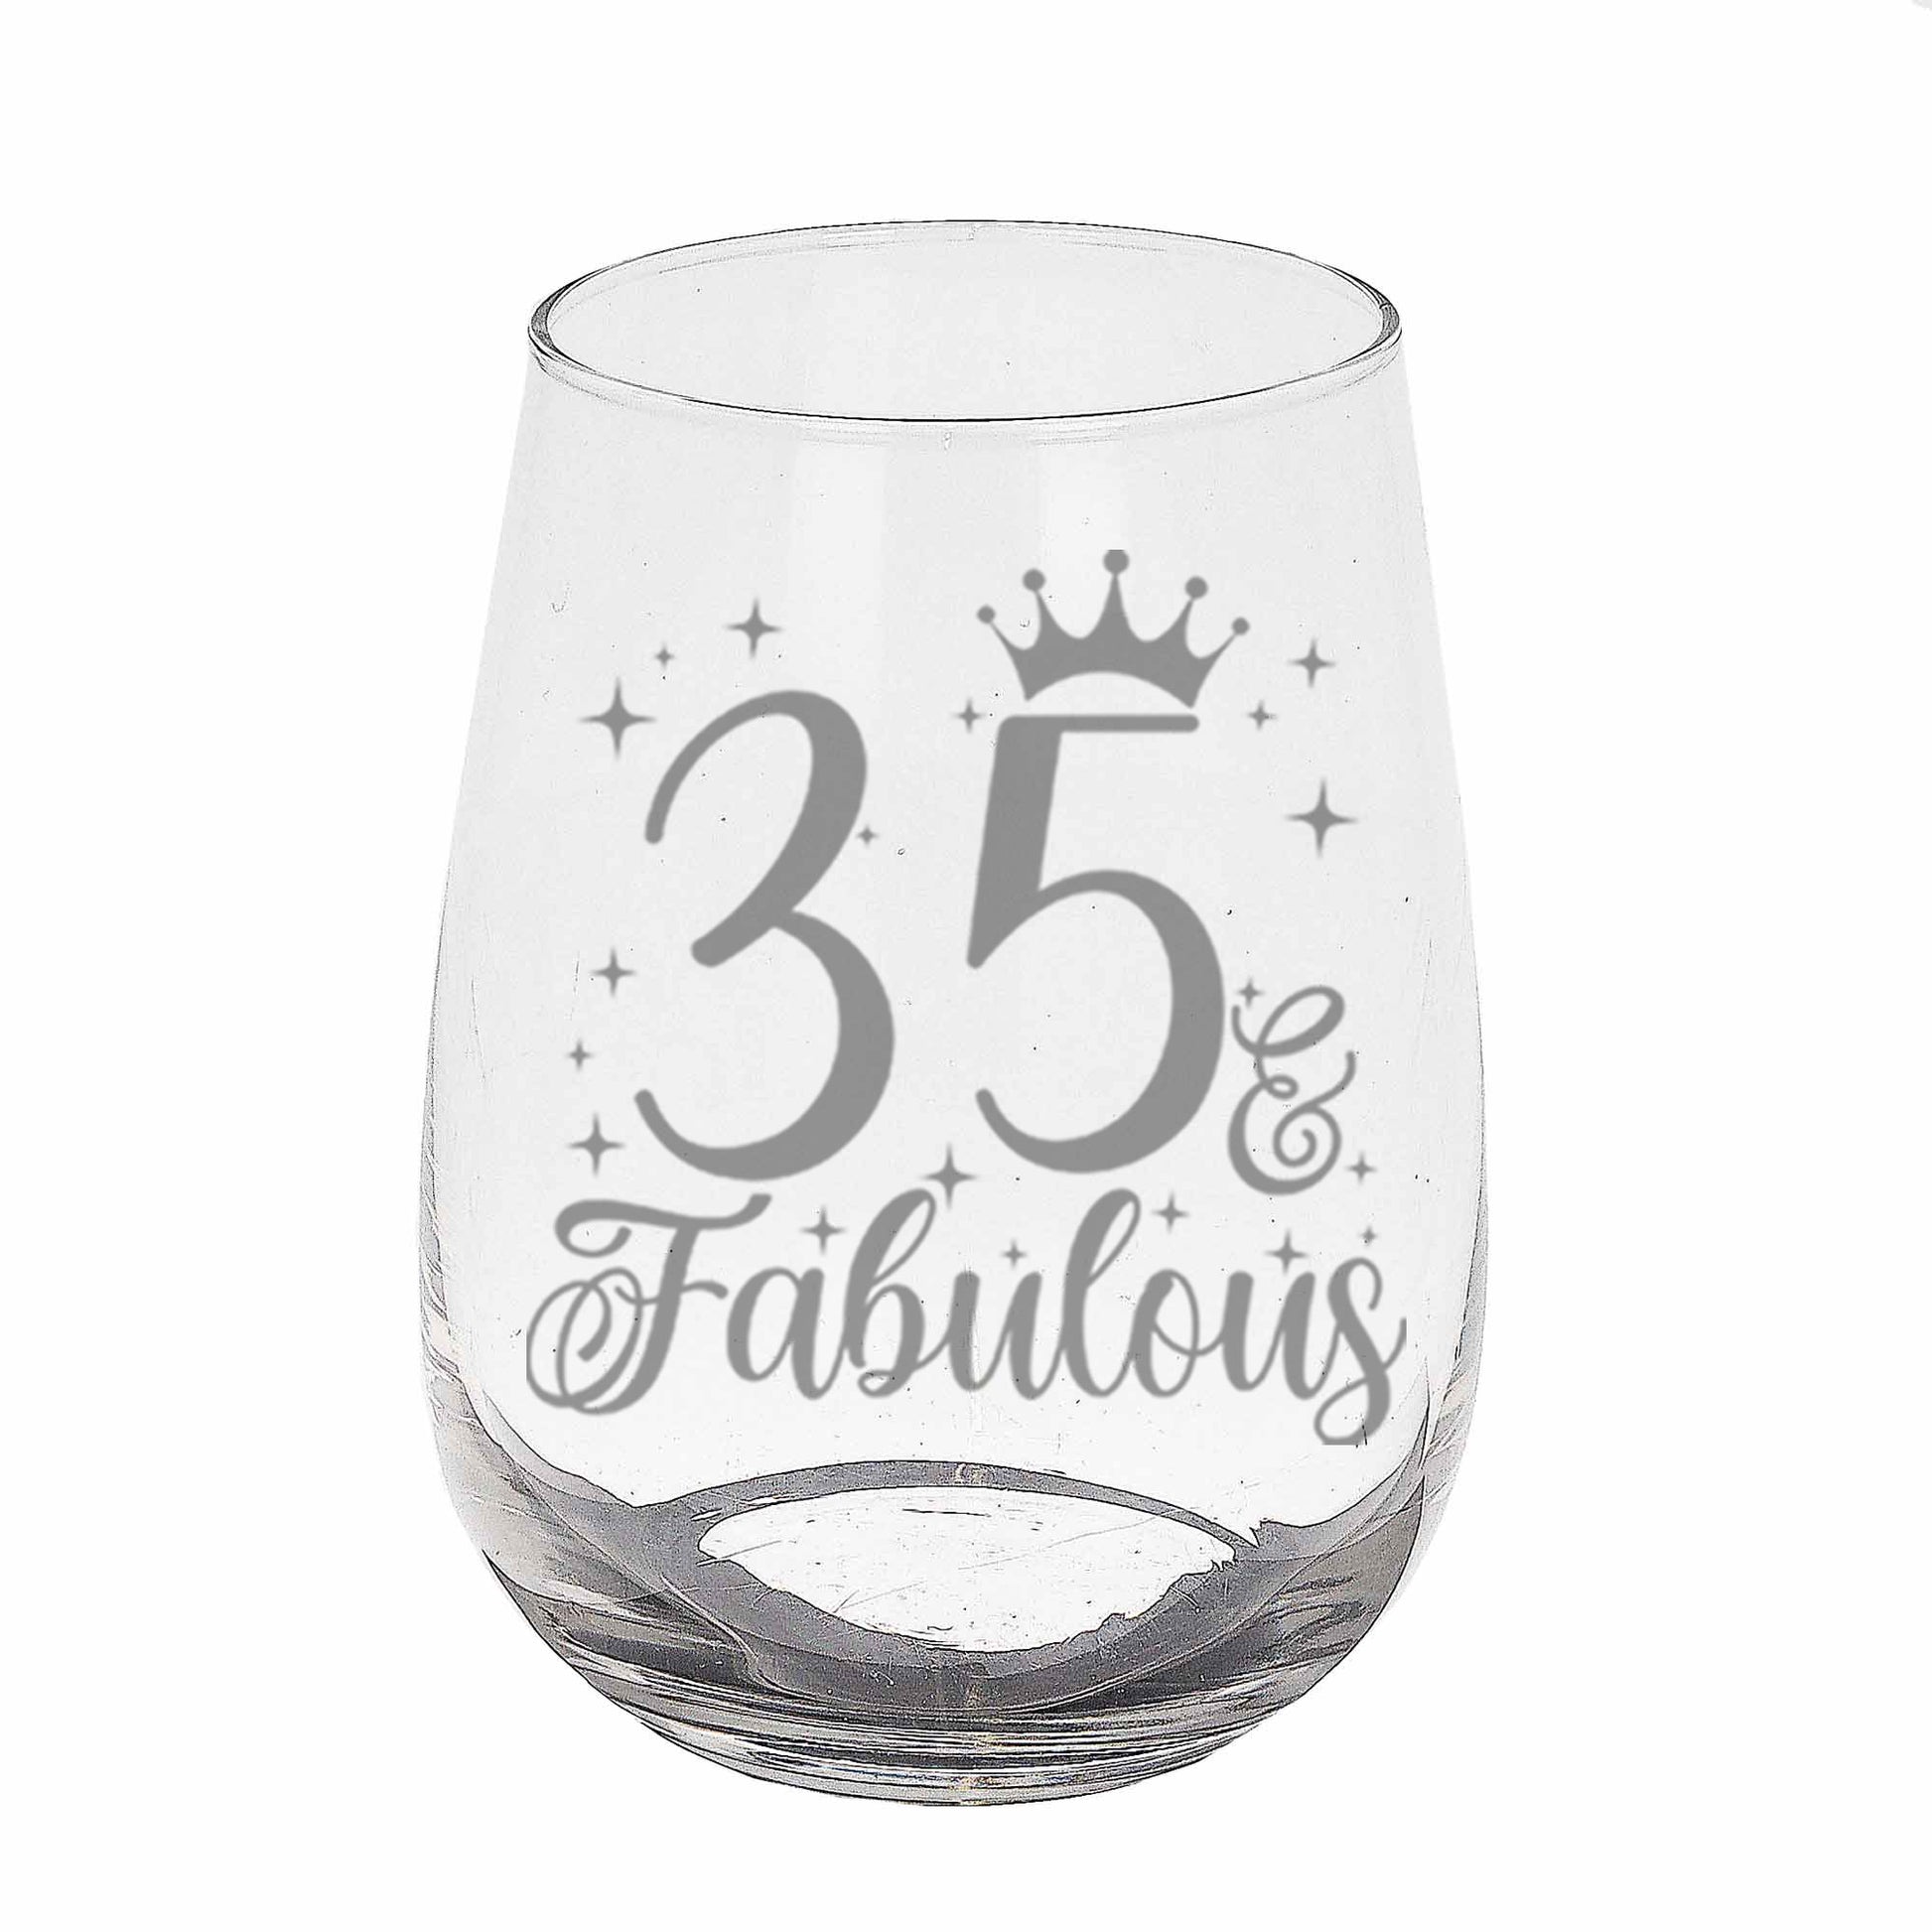 35 & Fabulous Engraved Stemless Gin Glass and/or Coaster Set  - Always Looking Good - Stemless Gin Glass On Its Own  